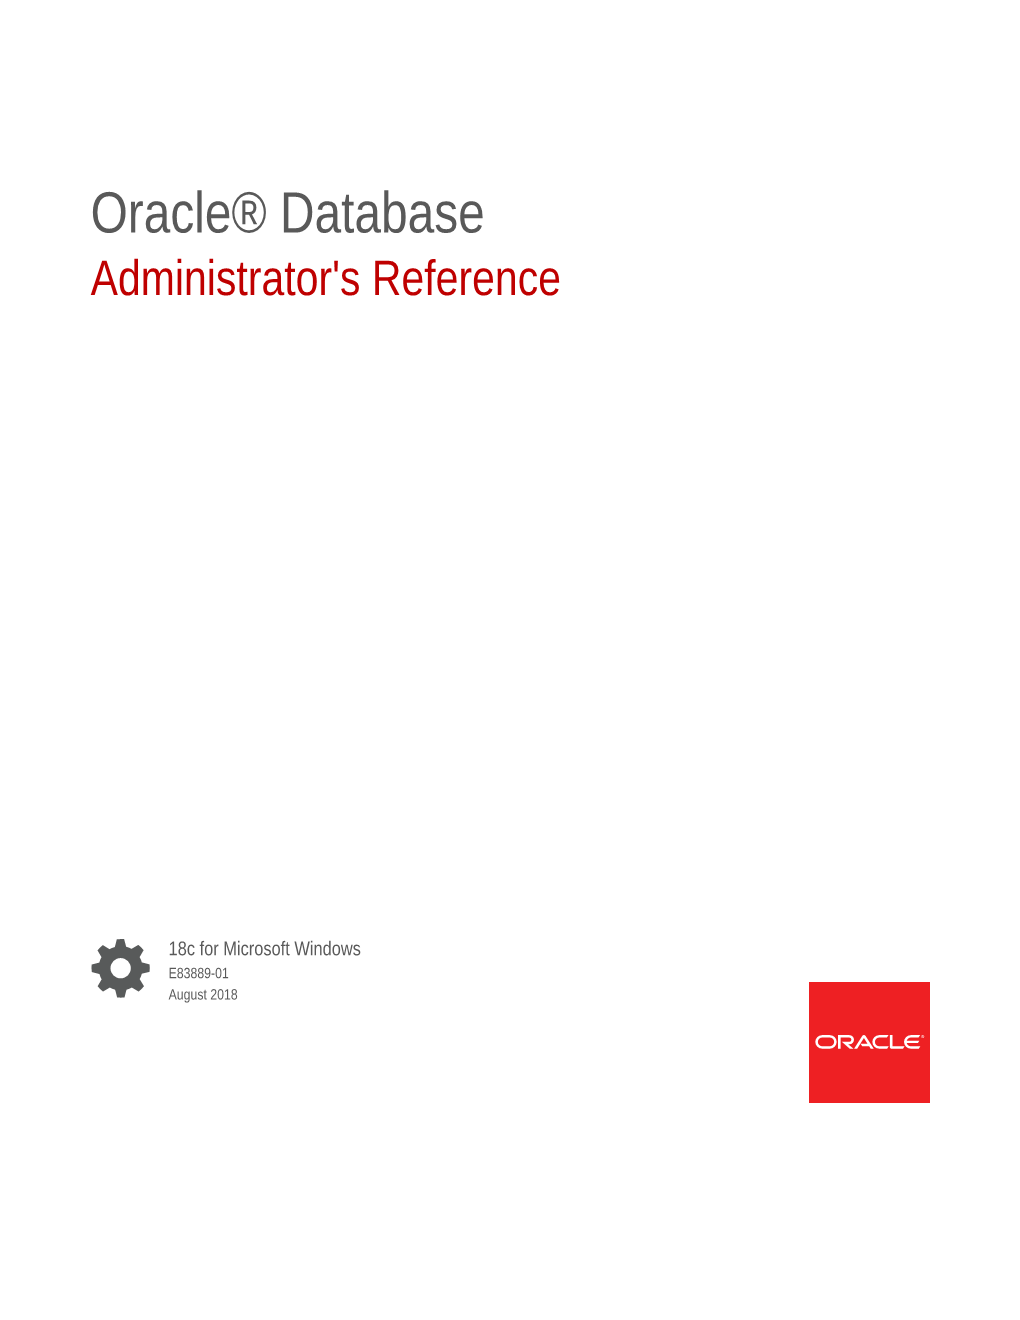 Oracle® Database Administrator's Reference